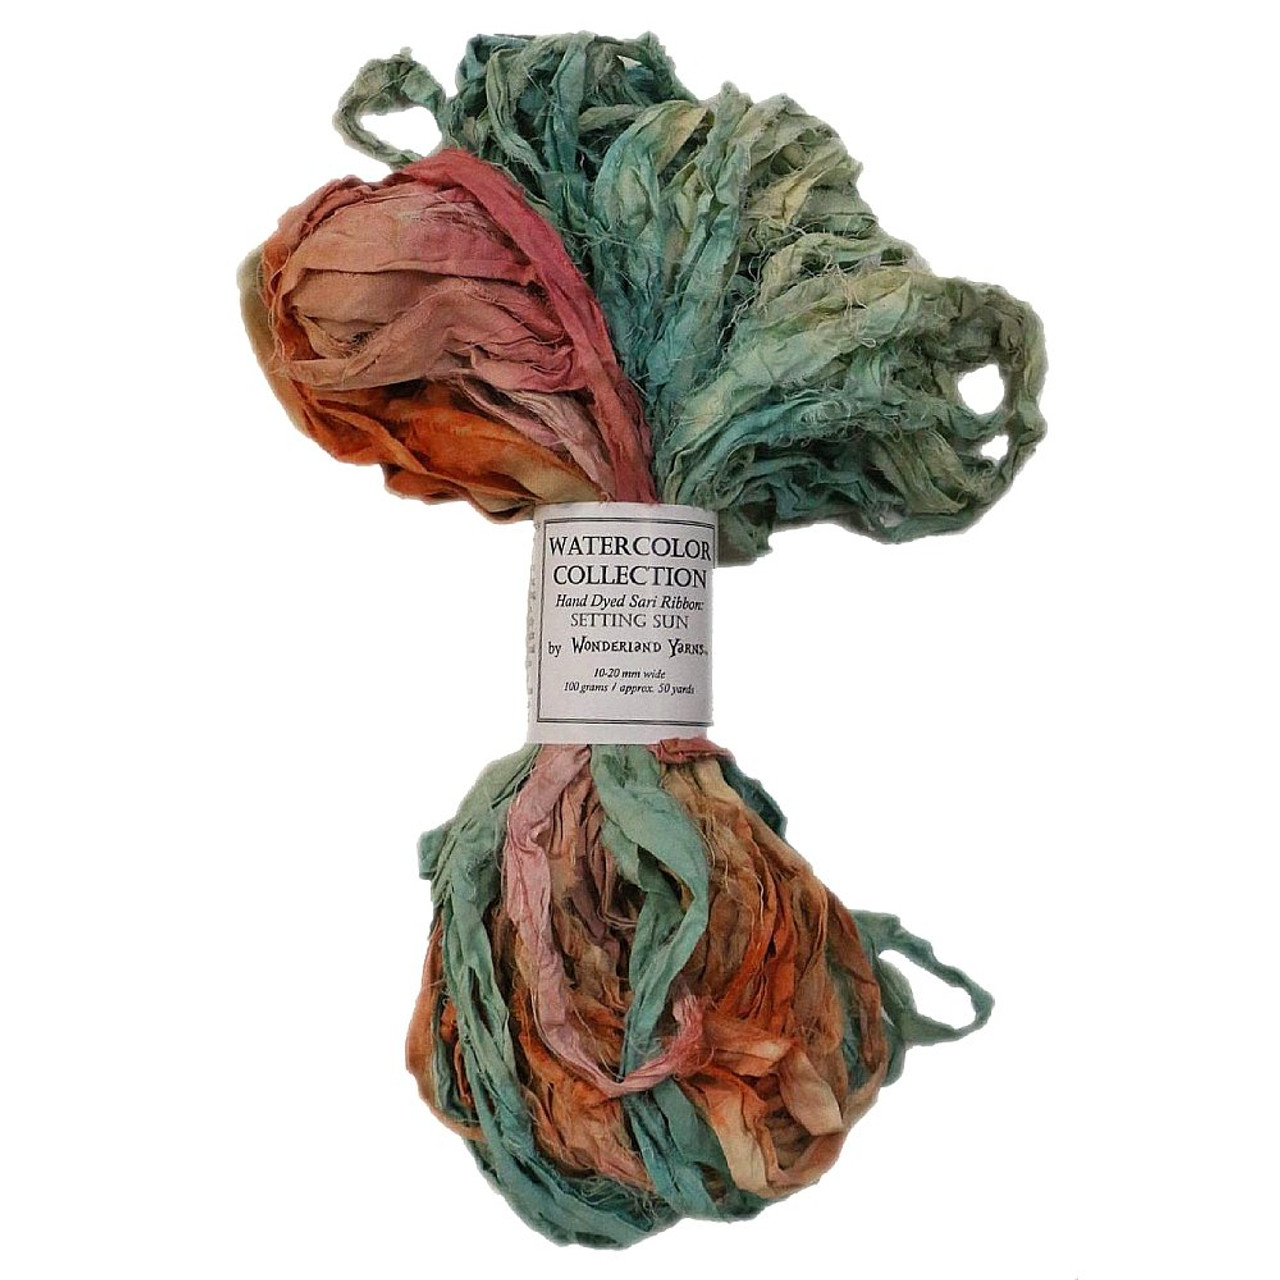 Abstract Fiber - Hand-Dyed Yarn and Fiber